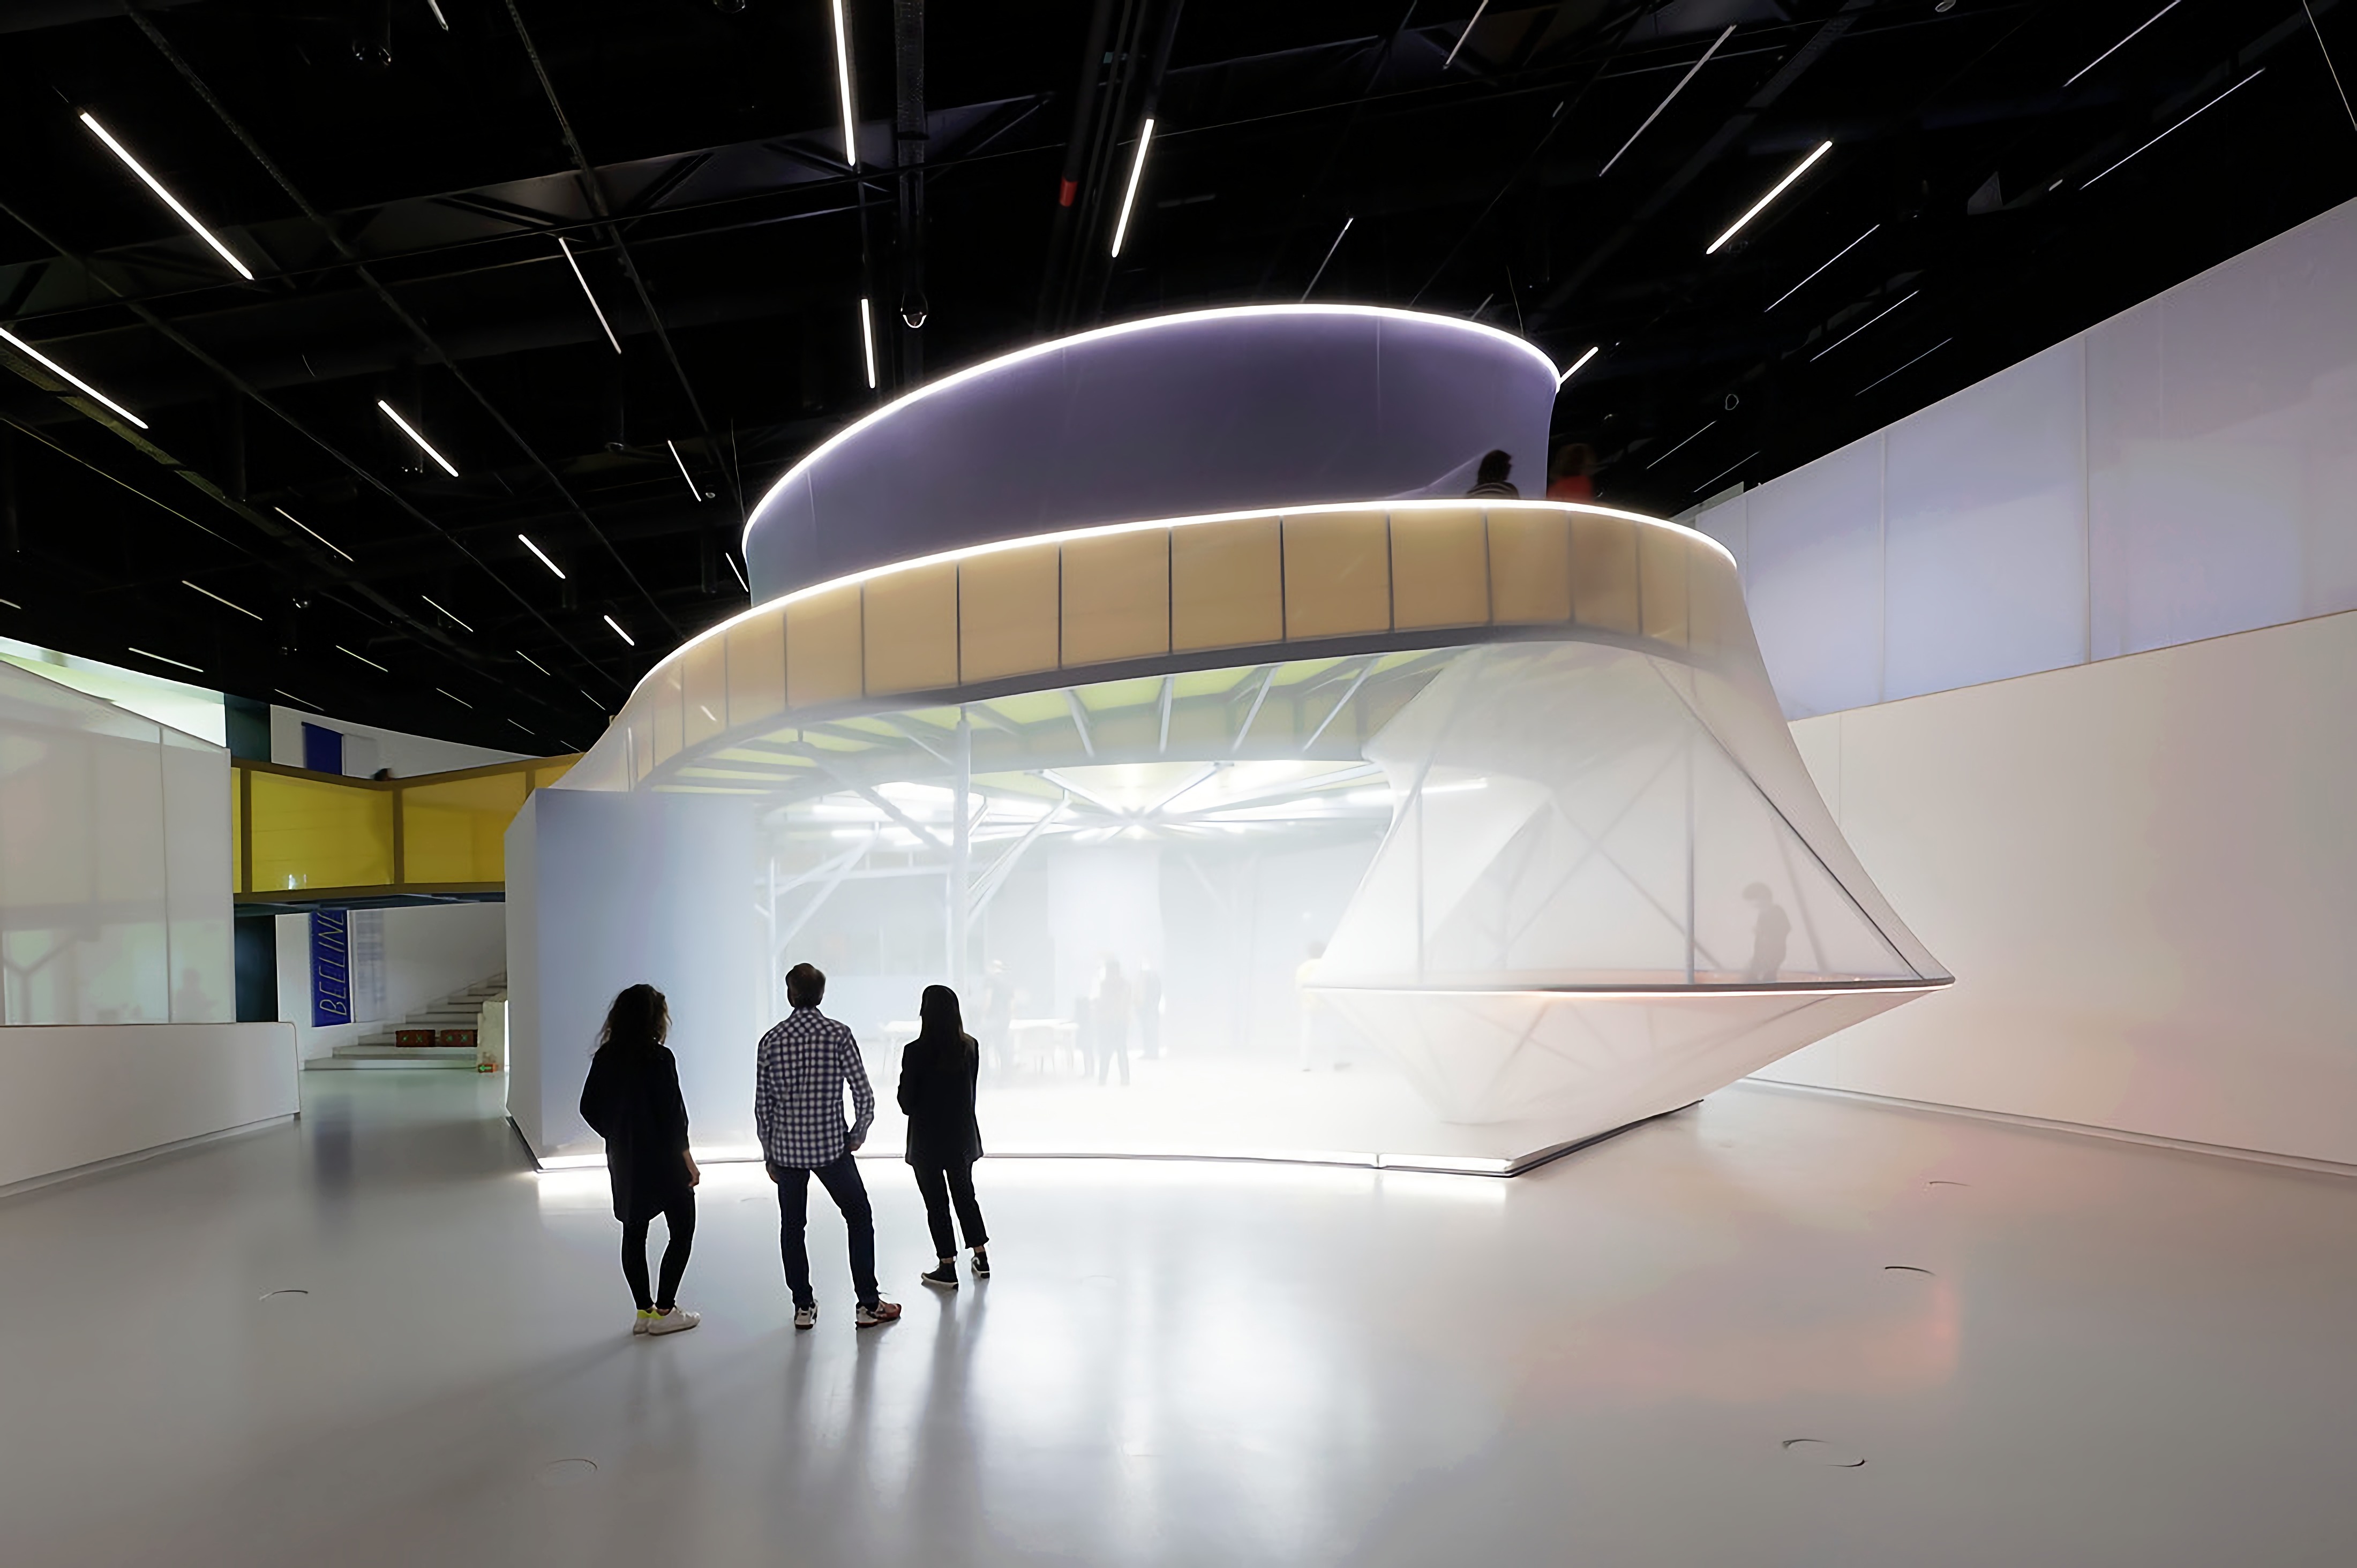 Beeline: A Temporary Installation That Maximizes the Function of the Museu